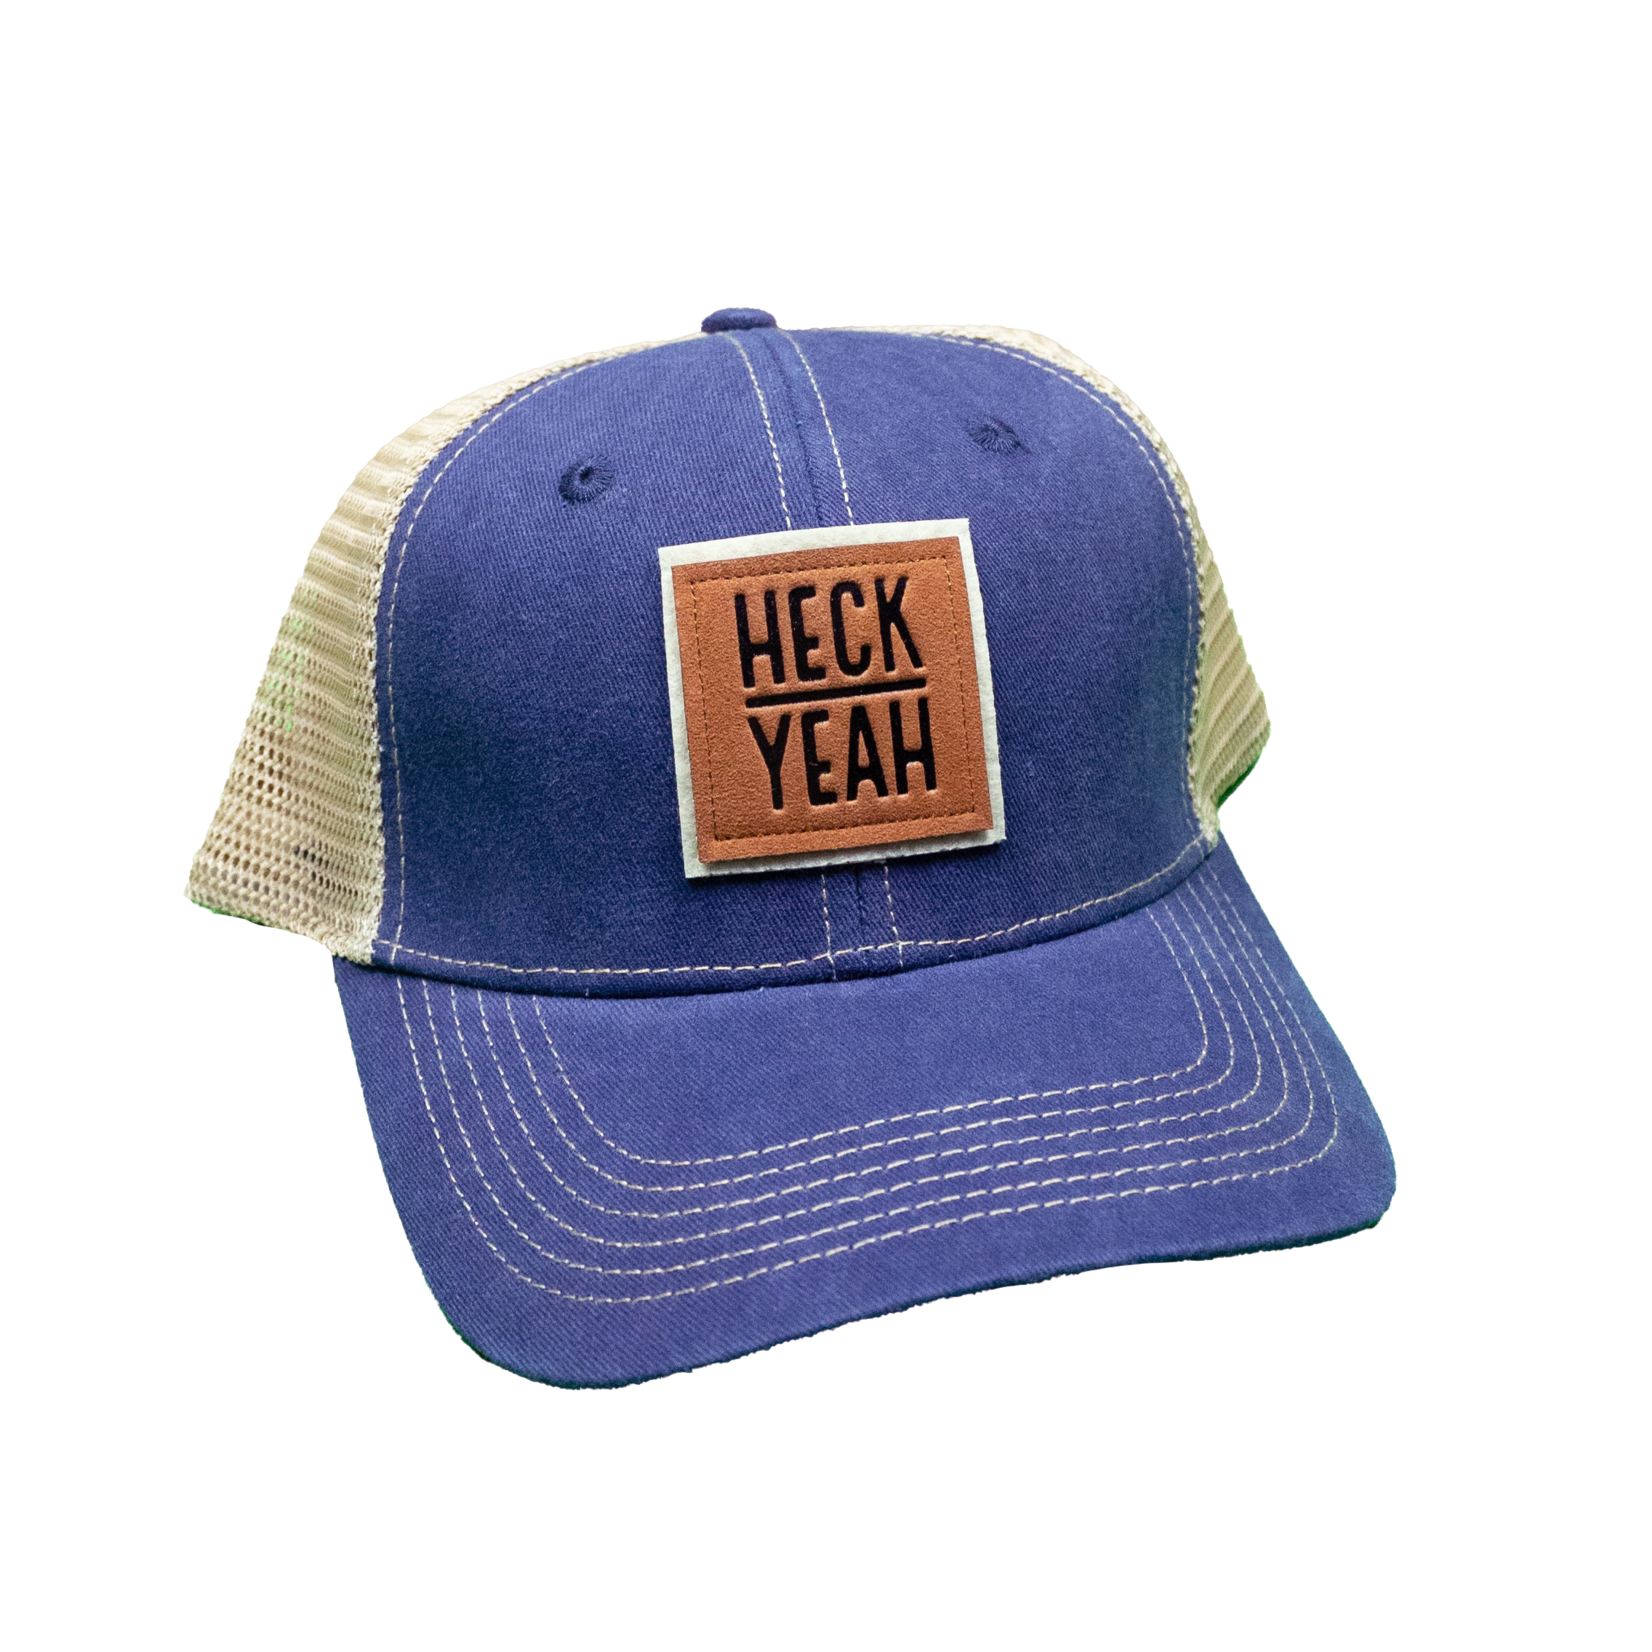 Southern Fried Cotton Heck Yeah Hat